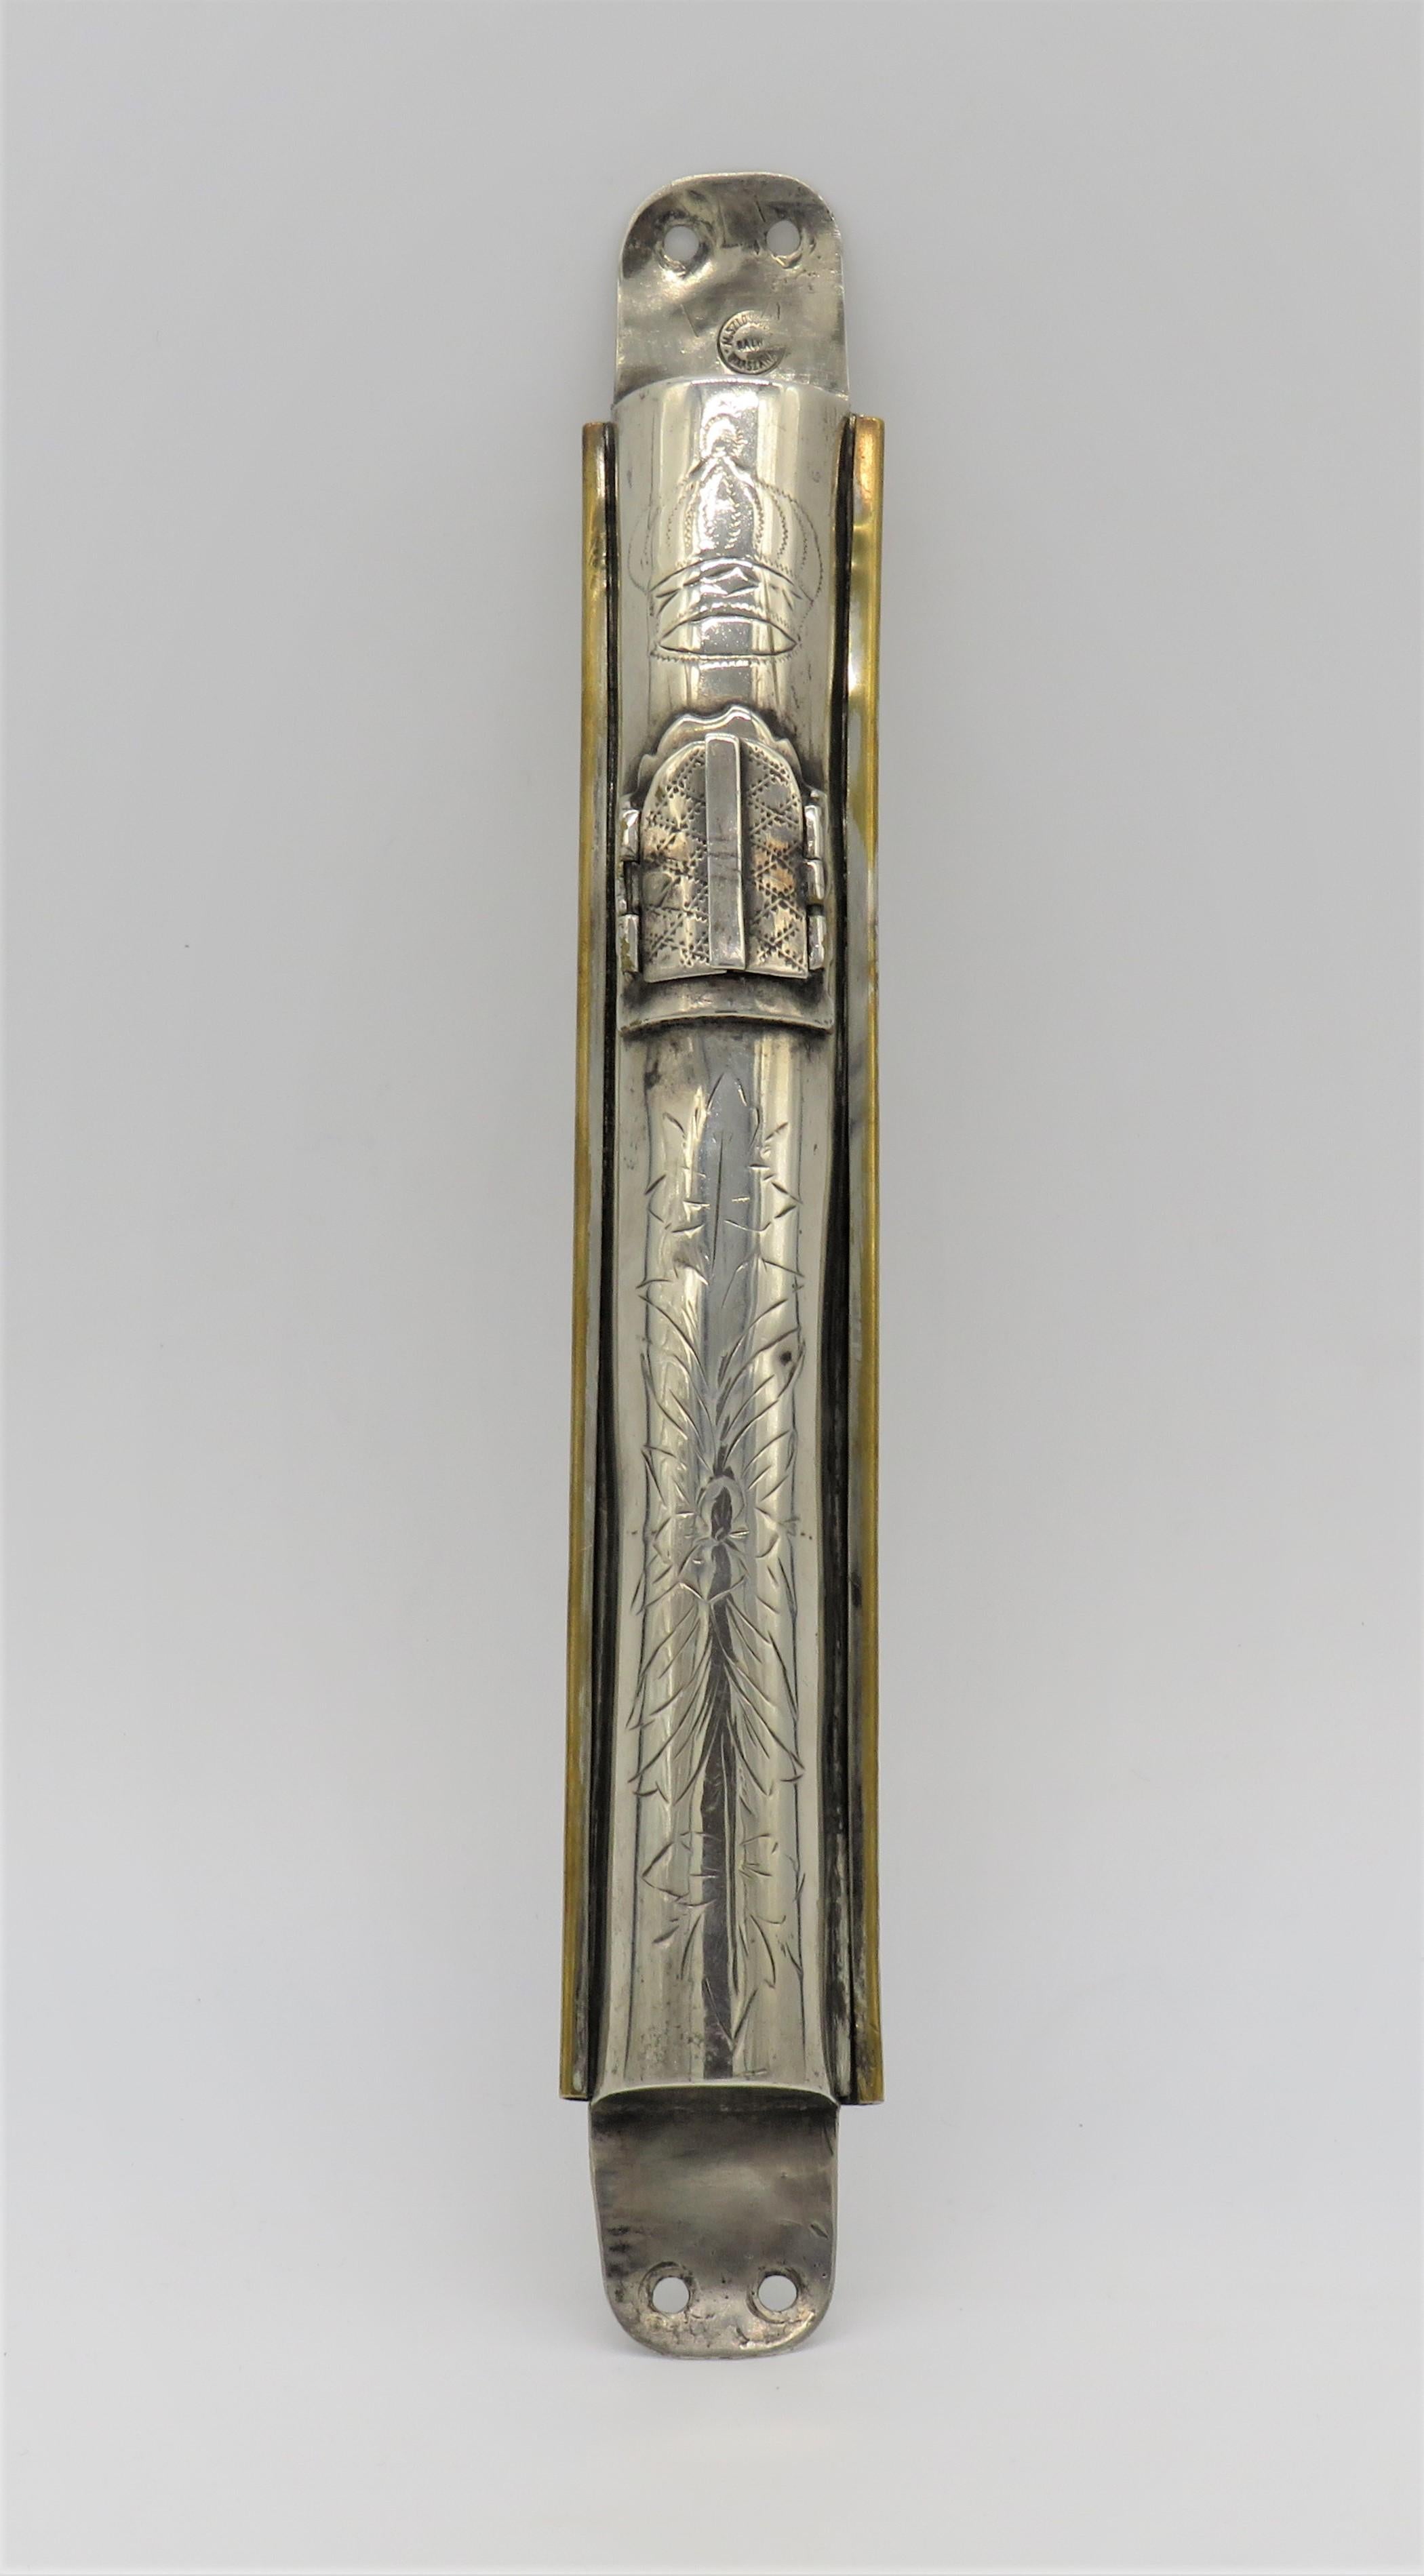 Silvered brass Mezuzah case by M. Szlossberg, Warsaw, Poland, circa 1890.
Hand-engraved with crown and with floral design.
The mezuzah has a small window with two doors, allowing to see the parchment inside.
Stamped with maker's mark and with the